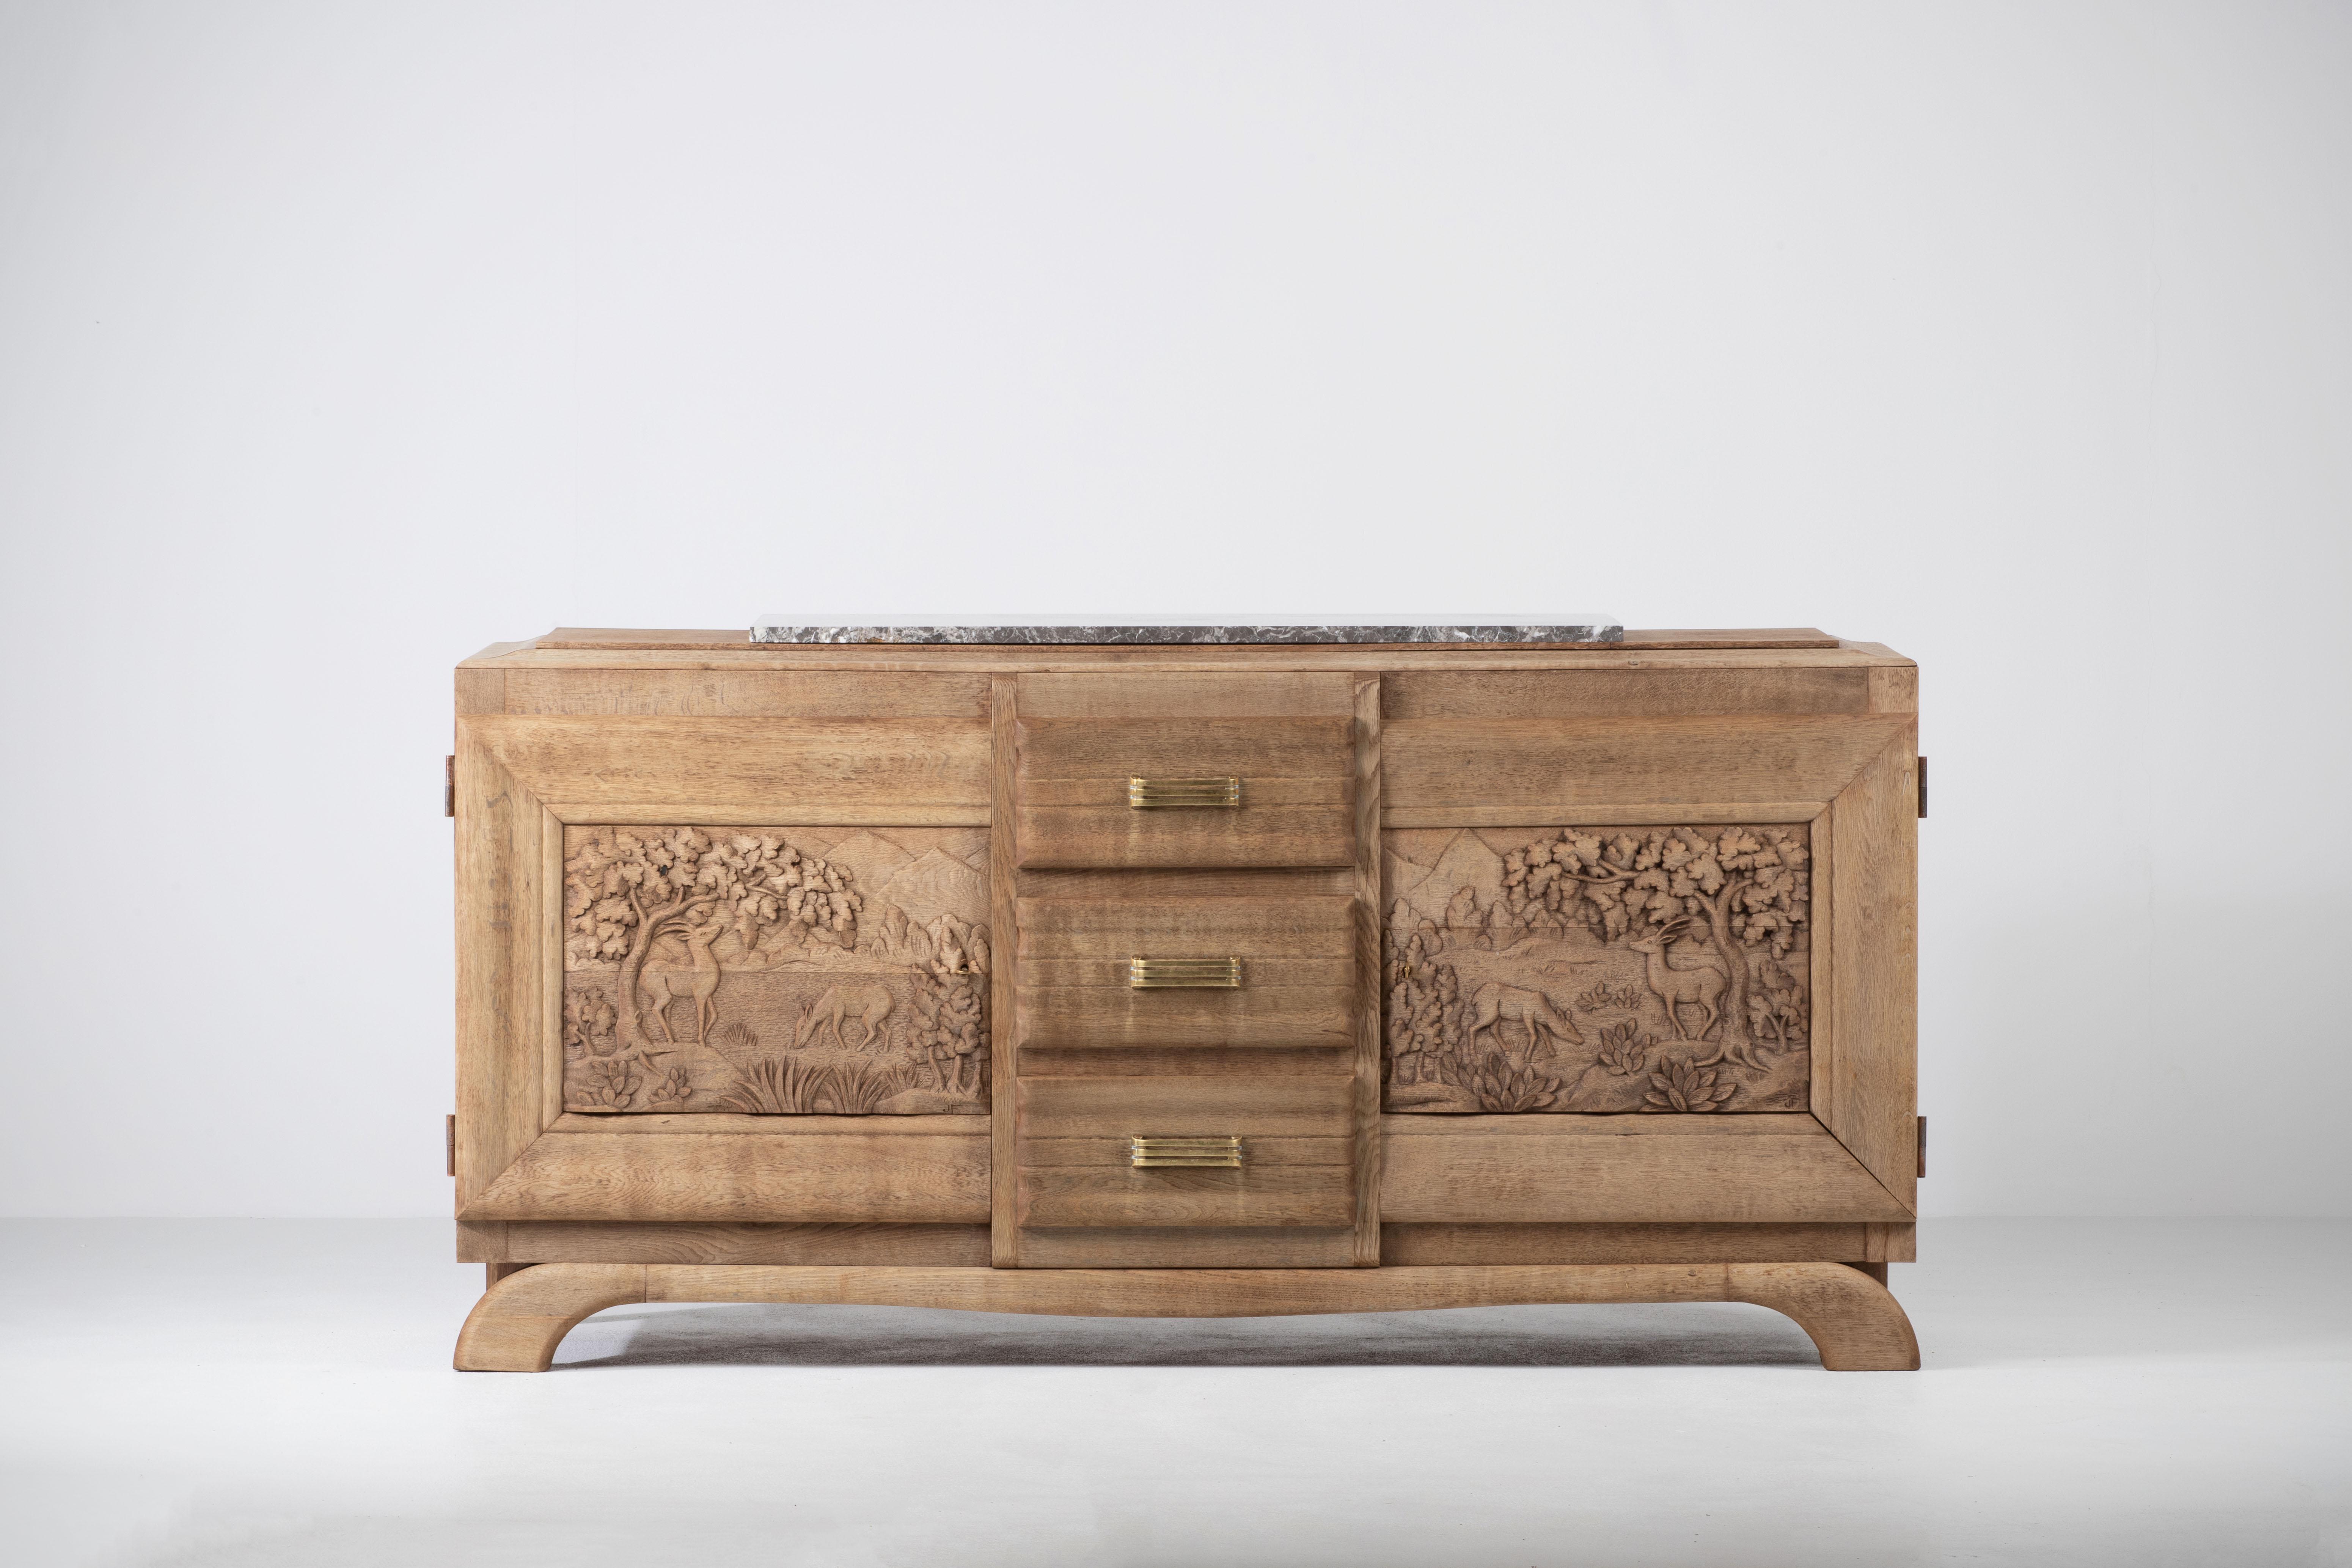 Very elegant credenza in solid oak, France, 1940s.
Art Deco Brutalist sideboard. 
The credenza consists of Two storage facilities covered with handcarved hunting scene designed doors and a column of drawers.
The refined wooden structures on the